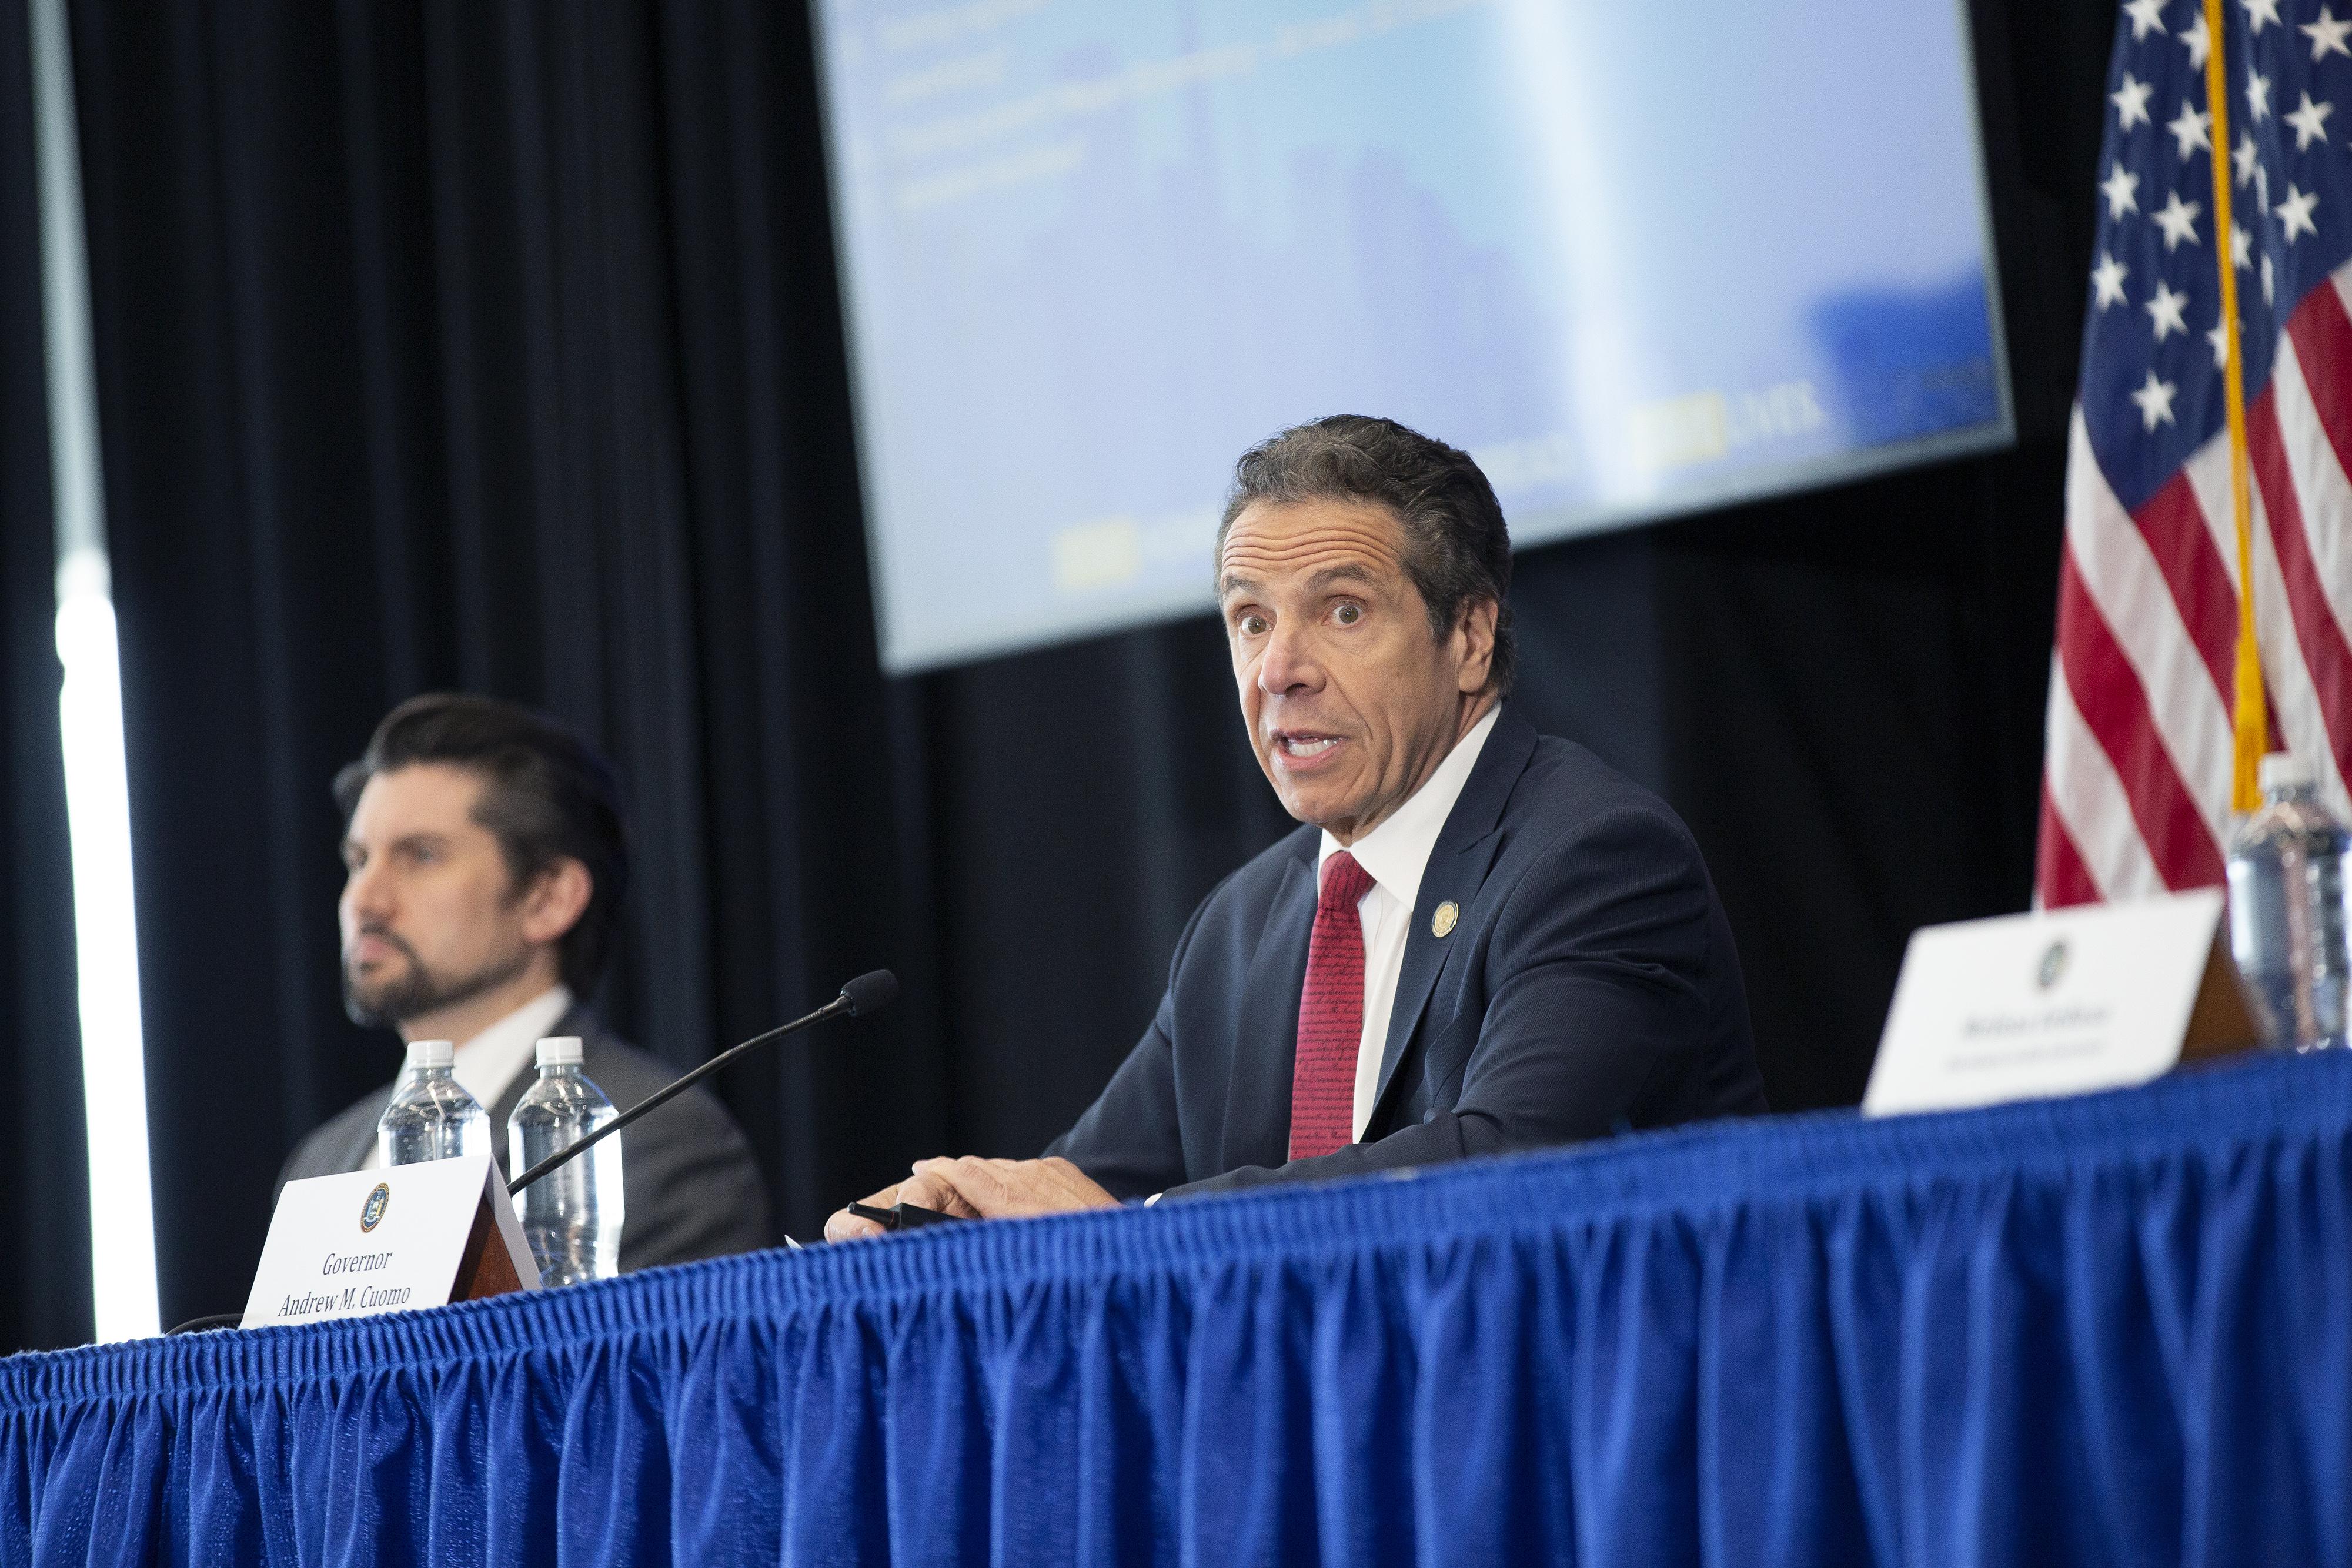 Governor Andrew Cuomo speaks during his daily Coronavirus press briefing at SUNY Upstate Medical University.